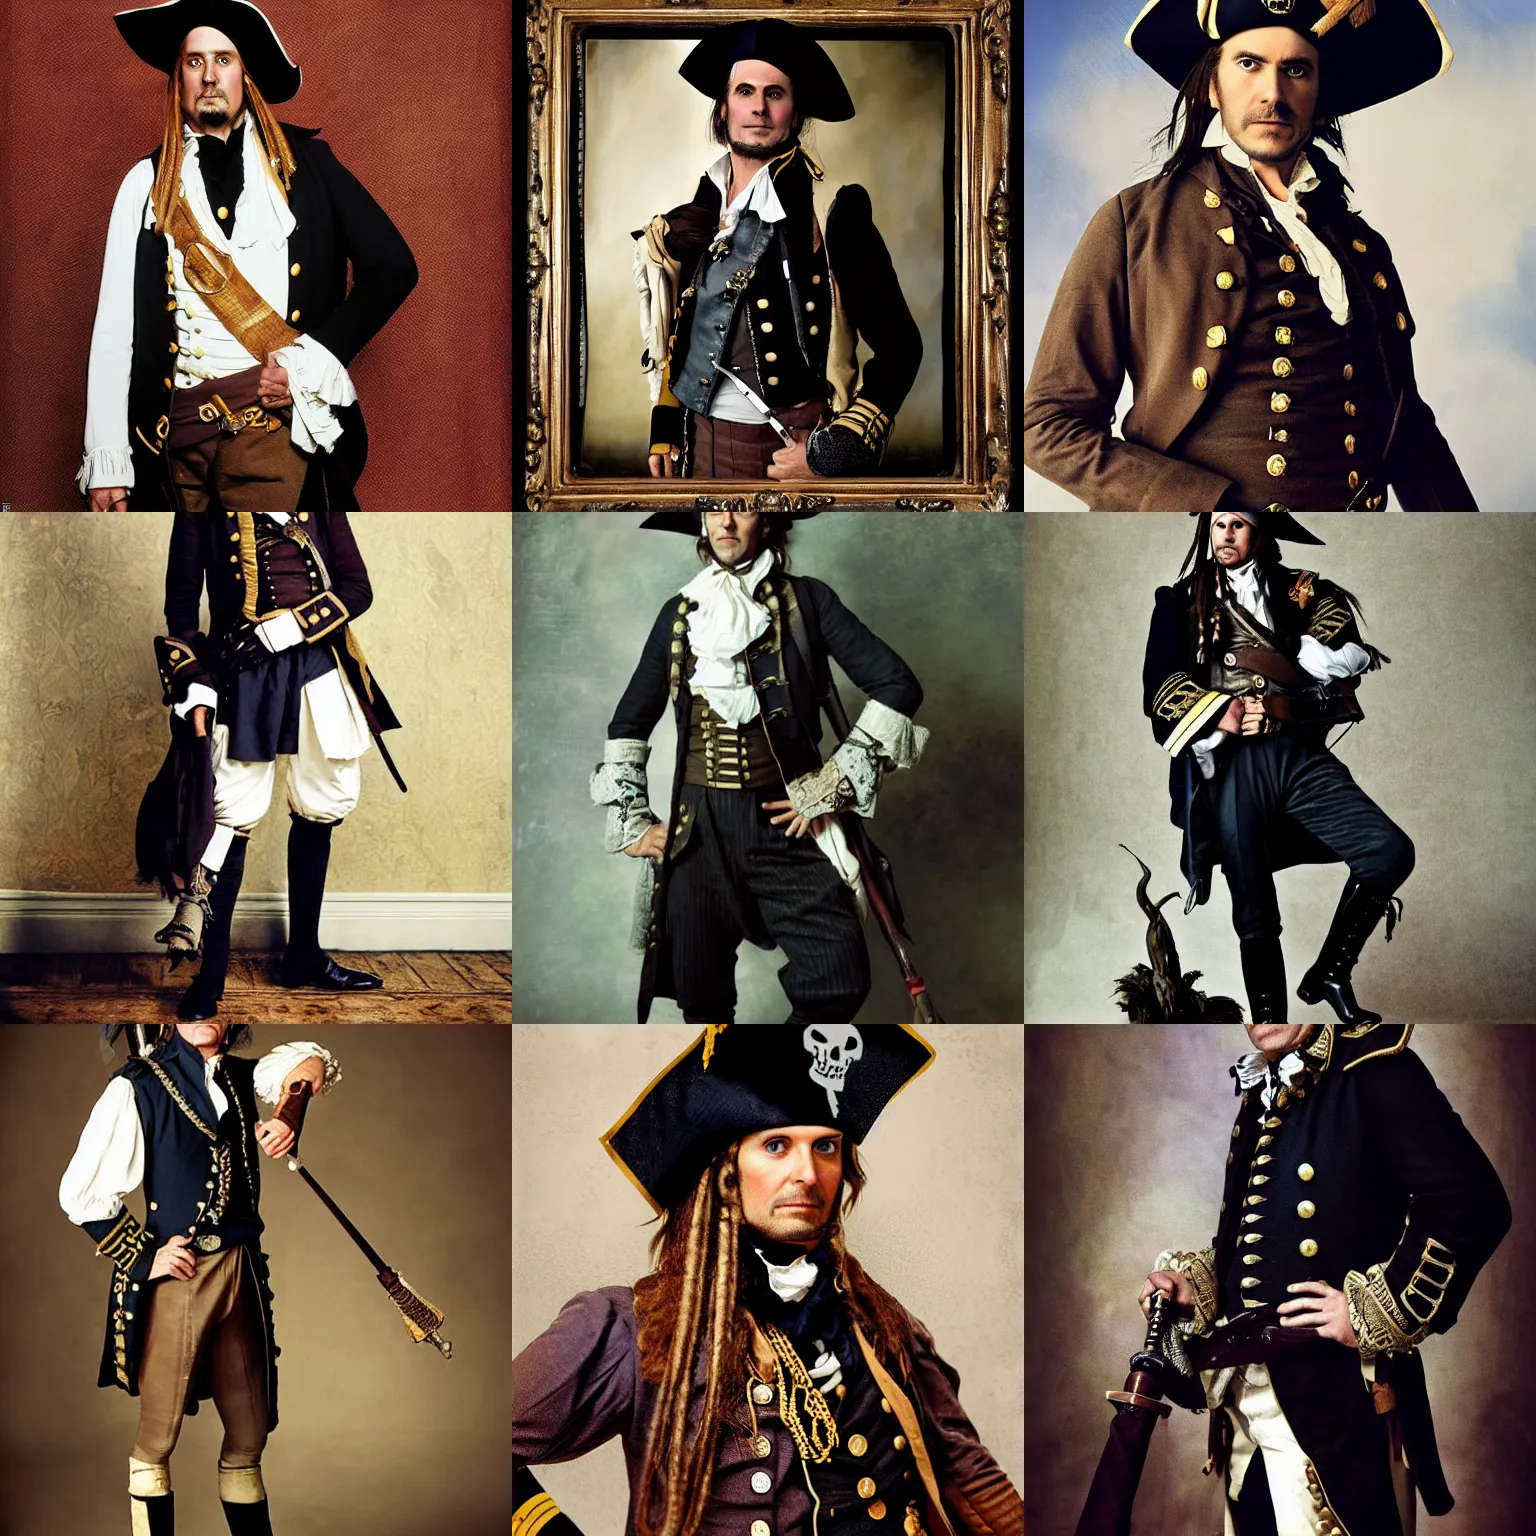 Prompt: admiral norrington from pirates of the caribbean, wearing waistcoat, breeches, stockings and a tricorn hat, photo portrait by annie leibovitz